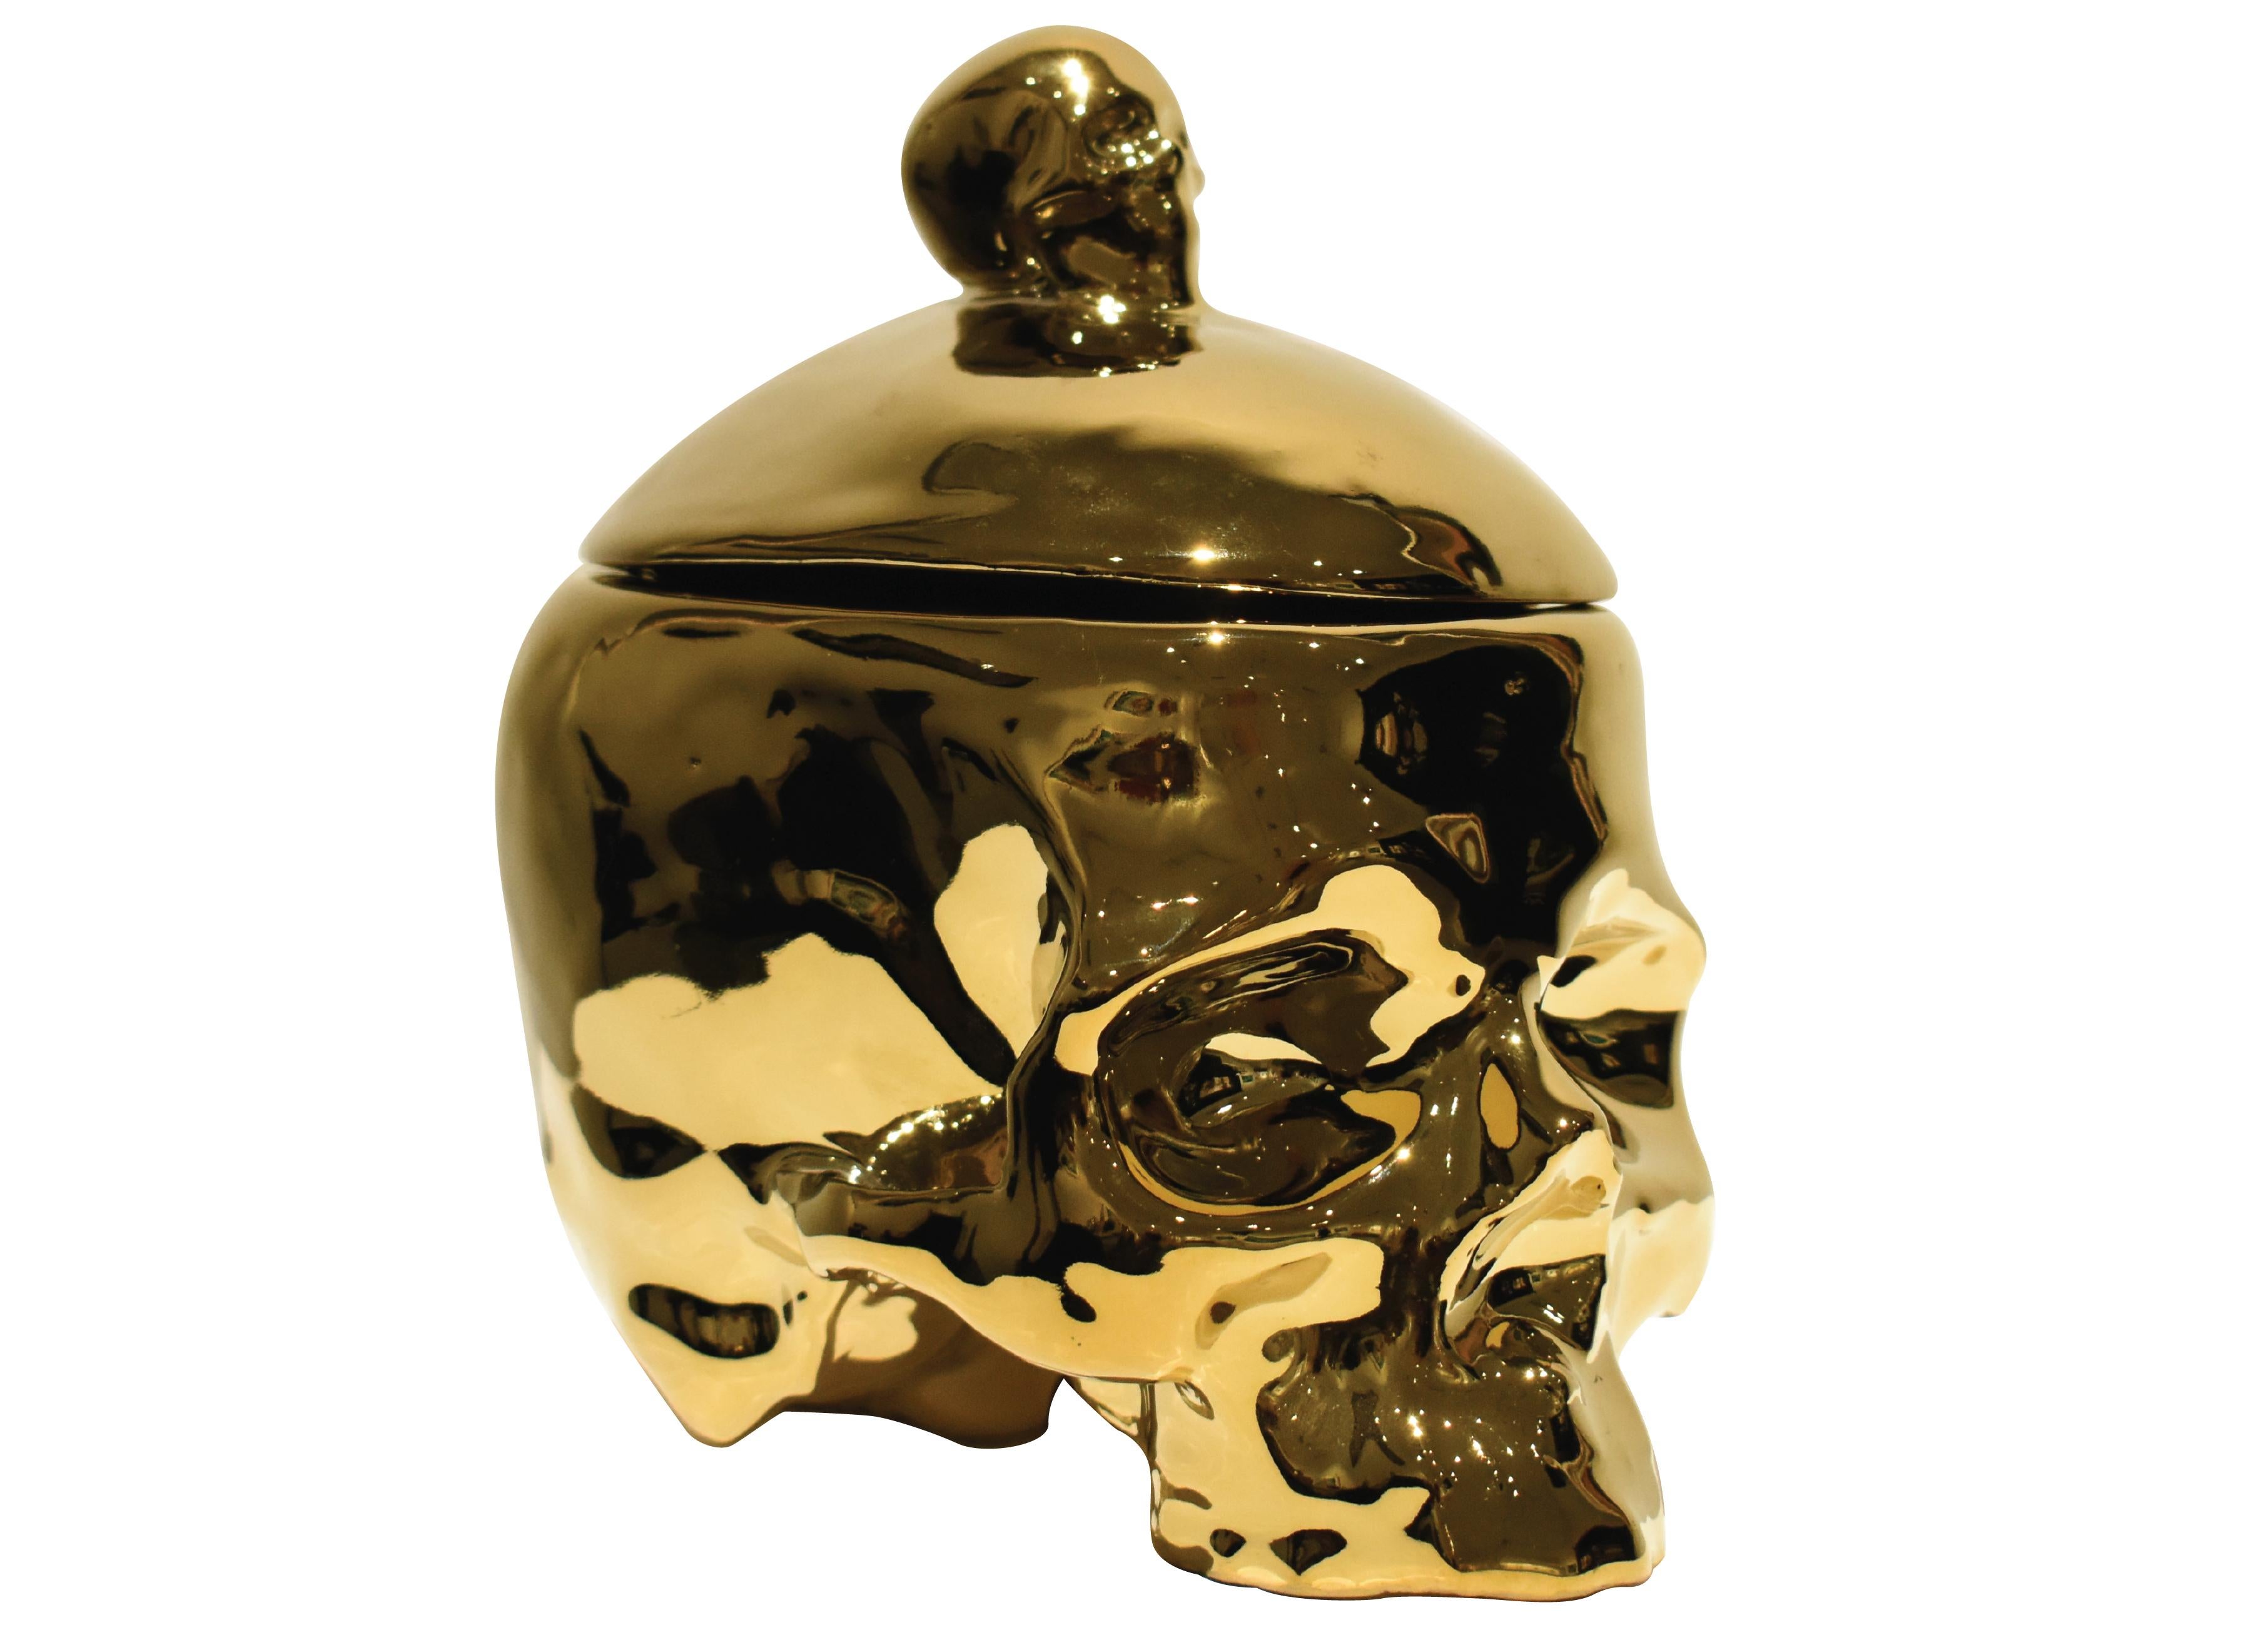 Porcelain Sculpture With Skull Shape In Gold Color, Removable Cover